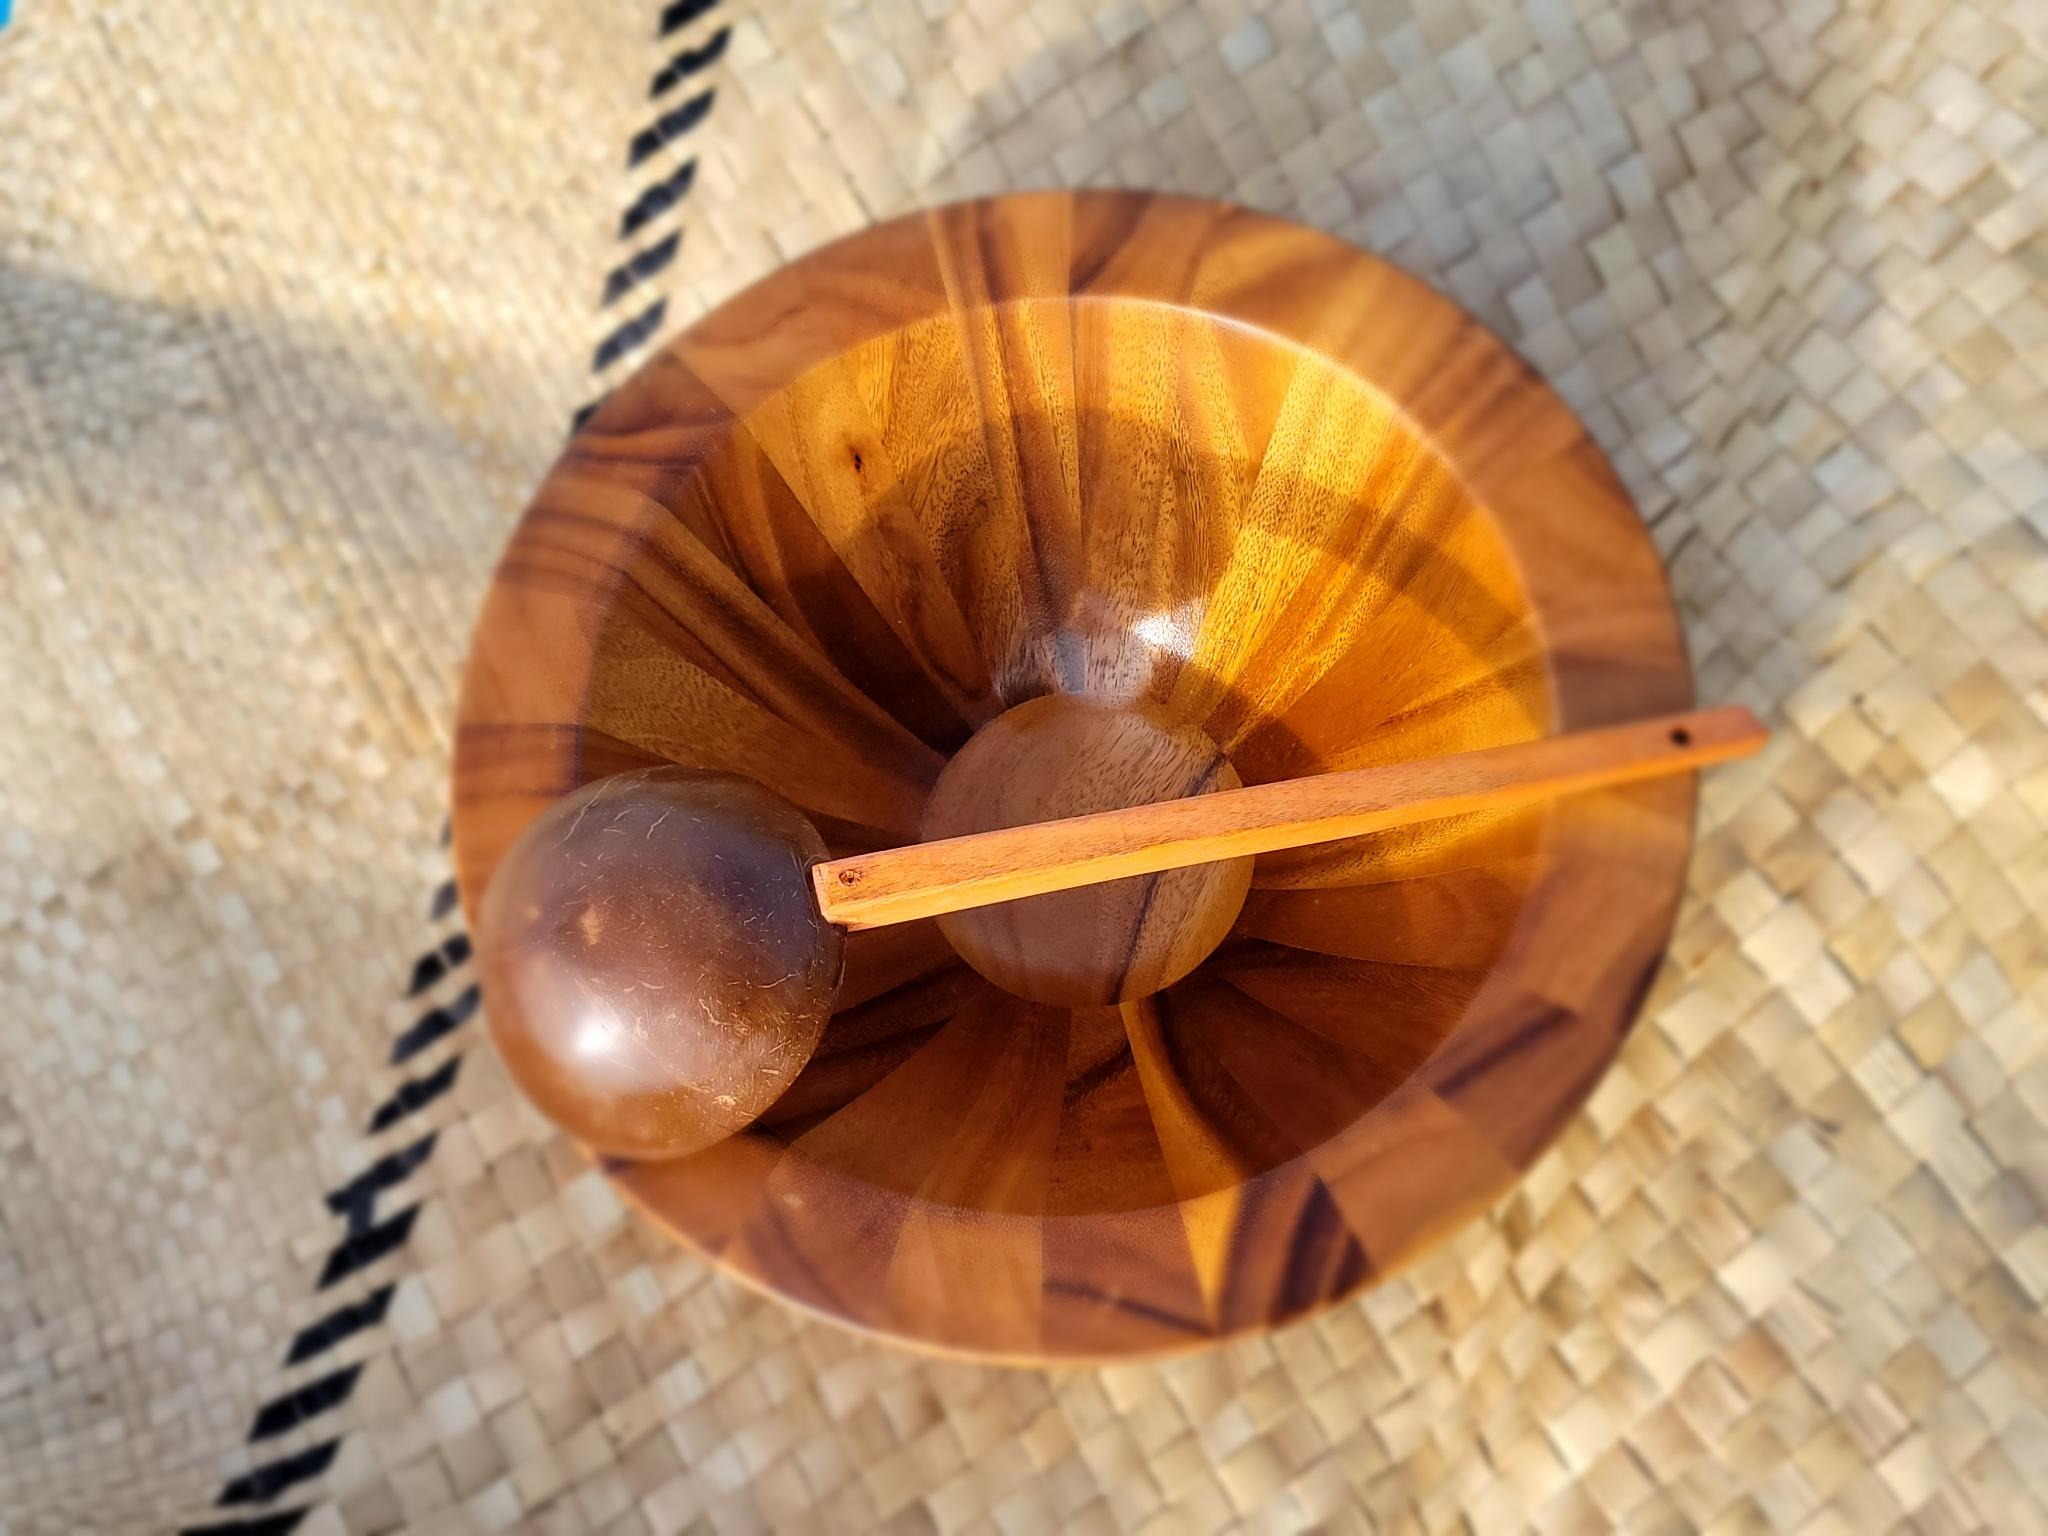 Gorgeous golden brown, handmade Tanoa with ladle made from the same beautiful wood.